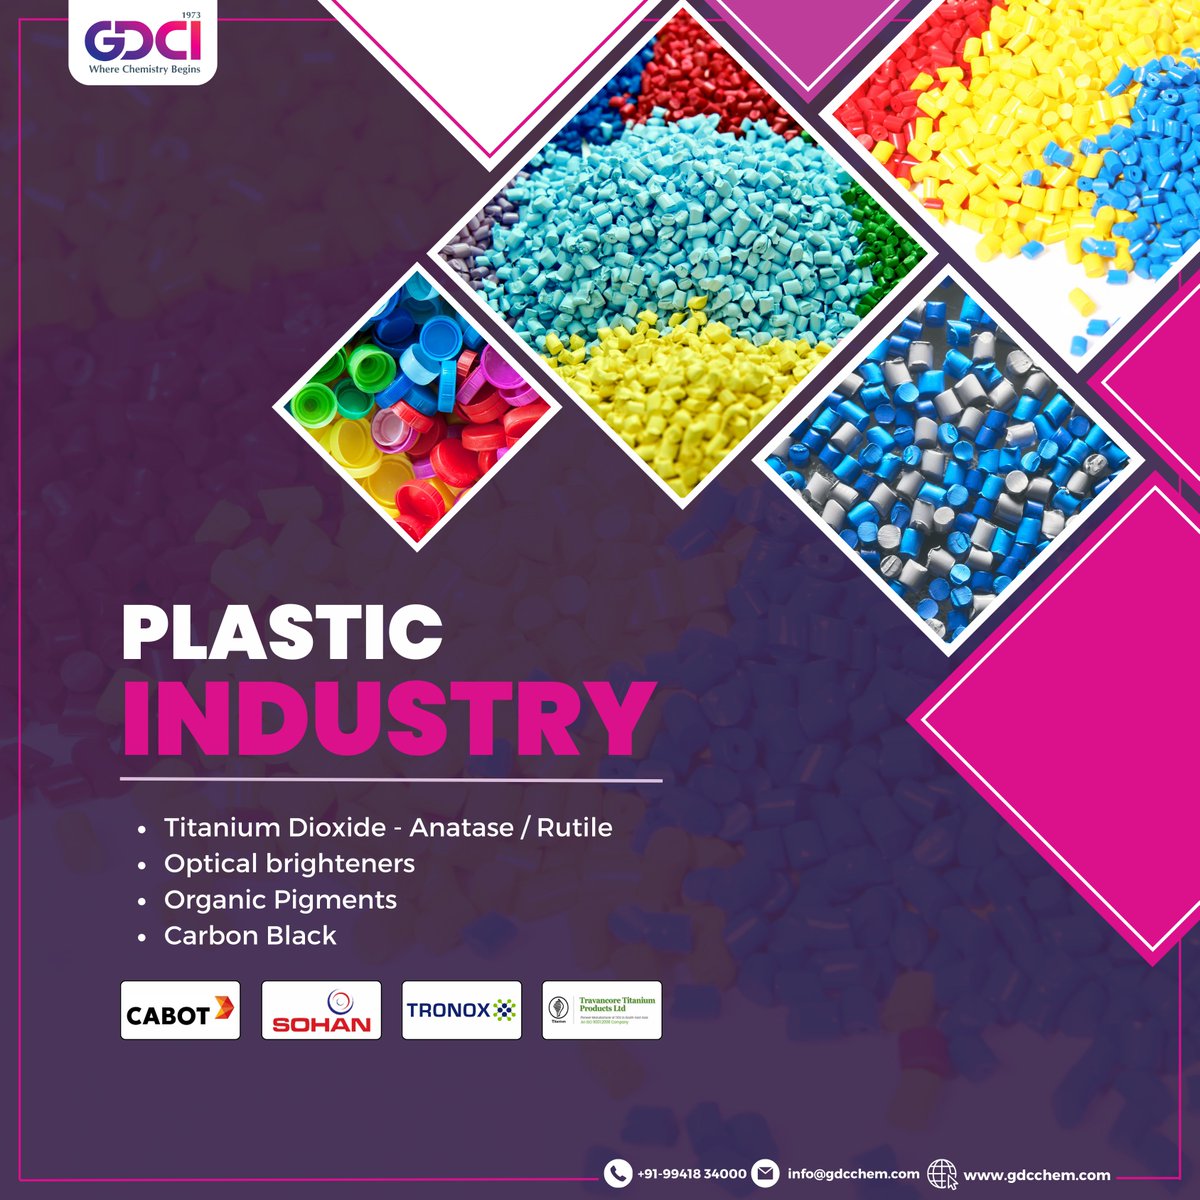 Empower your plastics with our comprehensive chemical solutions. Elevate your industry standards with every polymer perfected.!

#ChemicalInnovations #PlasticsIndustry #PolymerPerfection #PlasticsTechnology #ChemicalSolutions #IndustryLeaders #InnovationStation #GDCIIndia